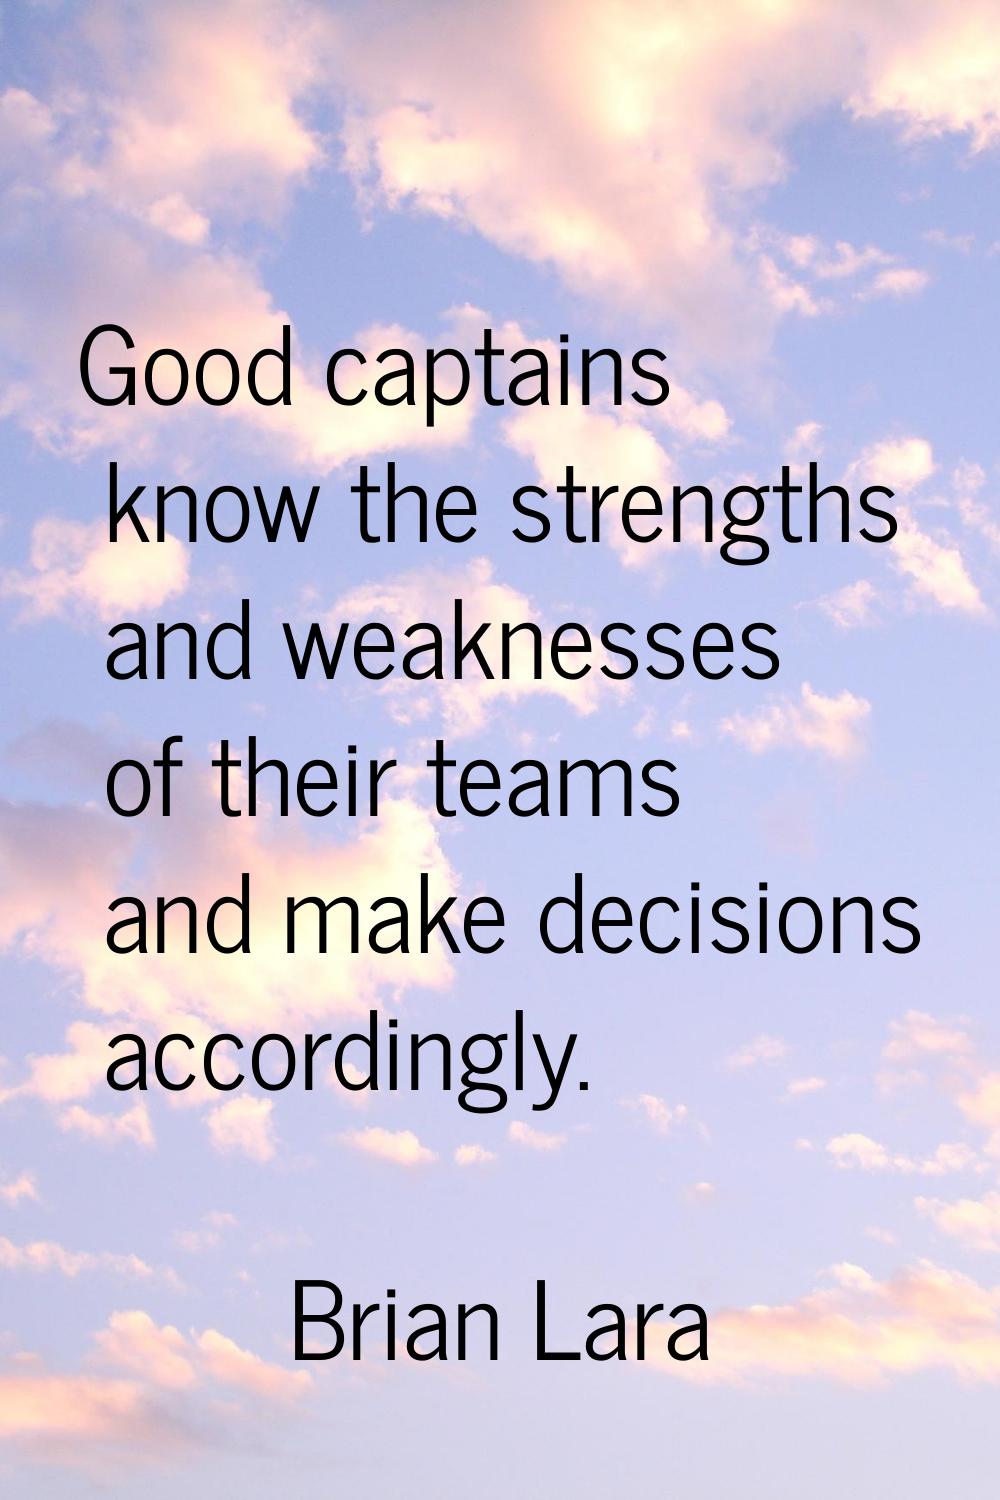 Good captains know the strengths and weaknesses of their teams and make decisions accordingly.